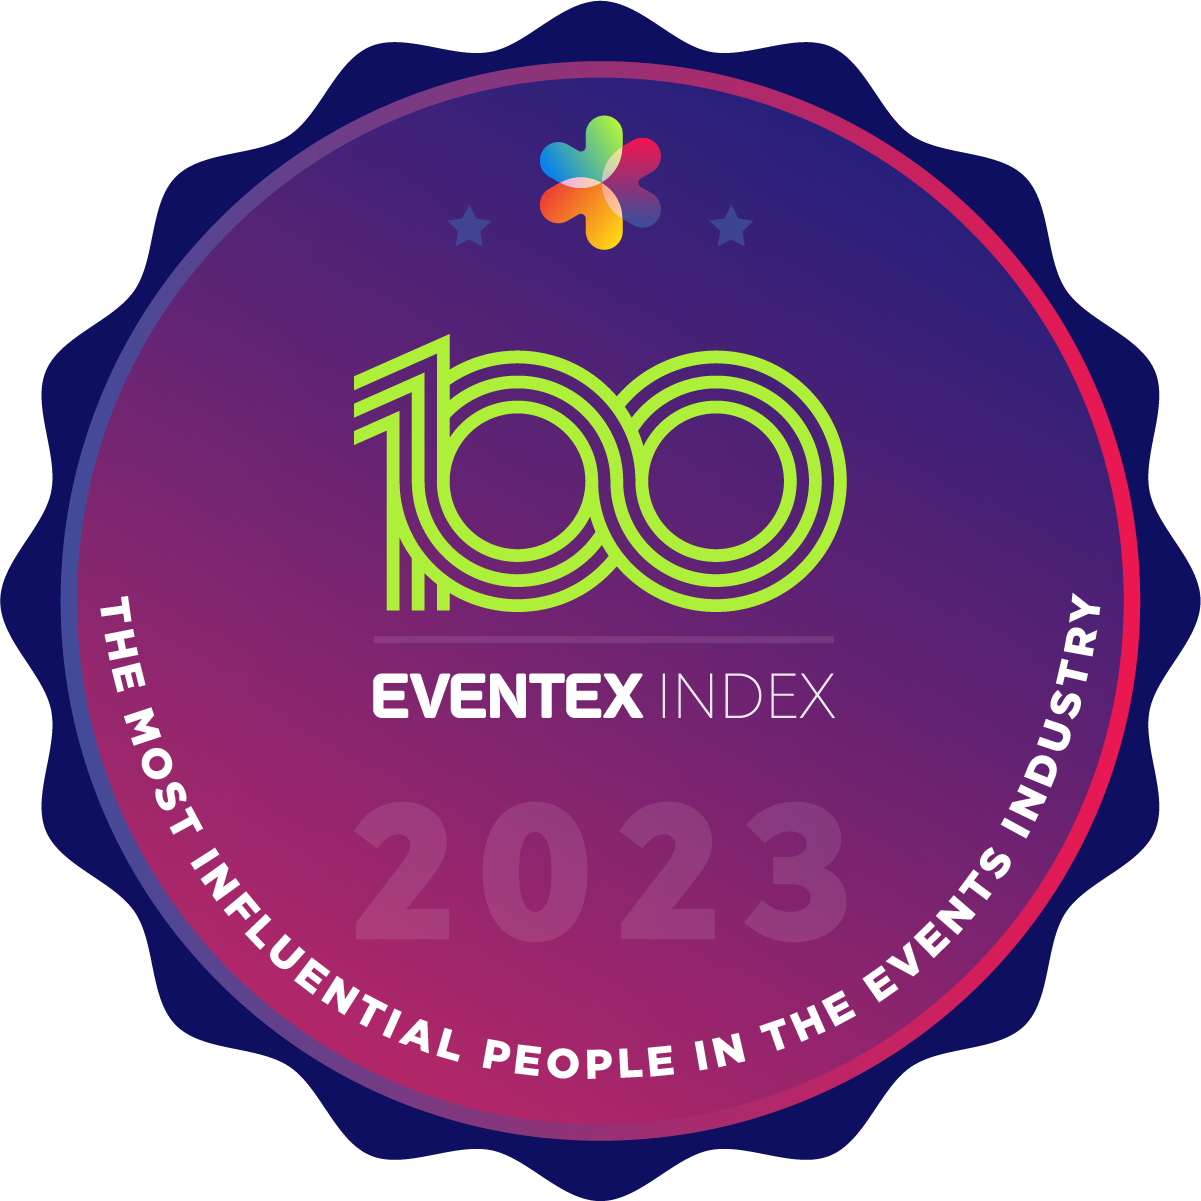 Nathan Cassar - Eventex 100 Most Influential People in the Event Industry Index